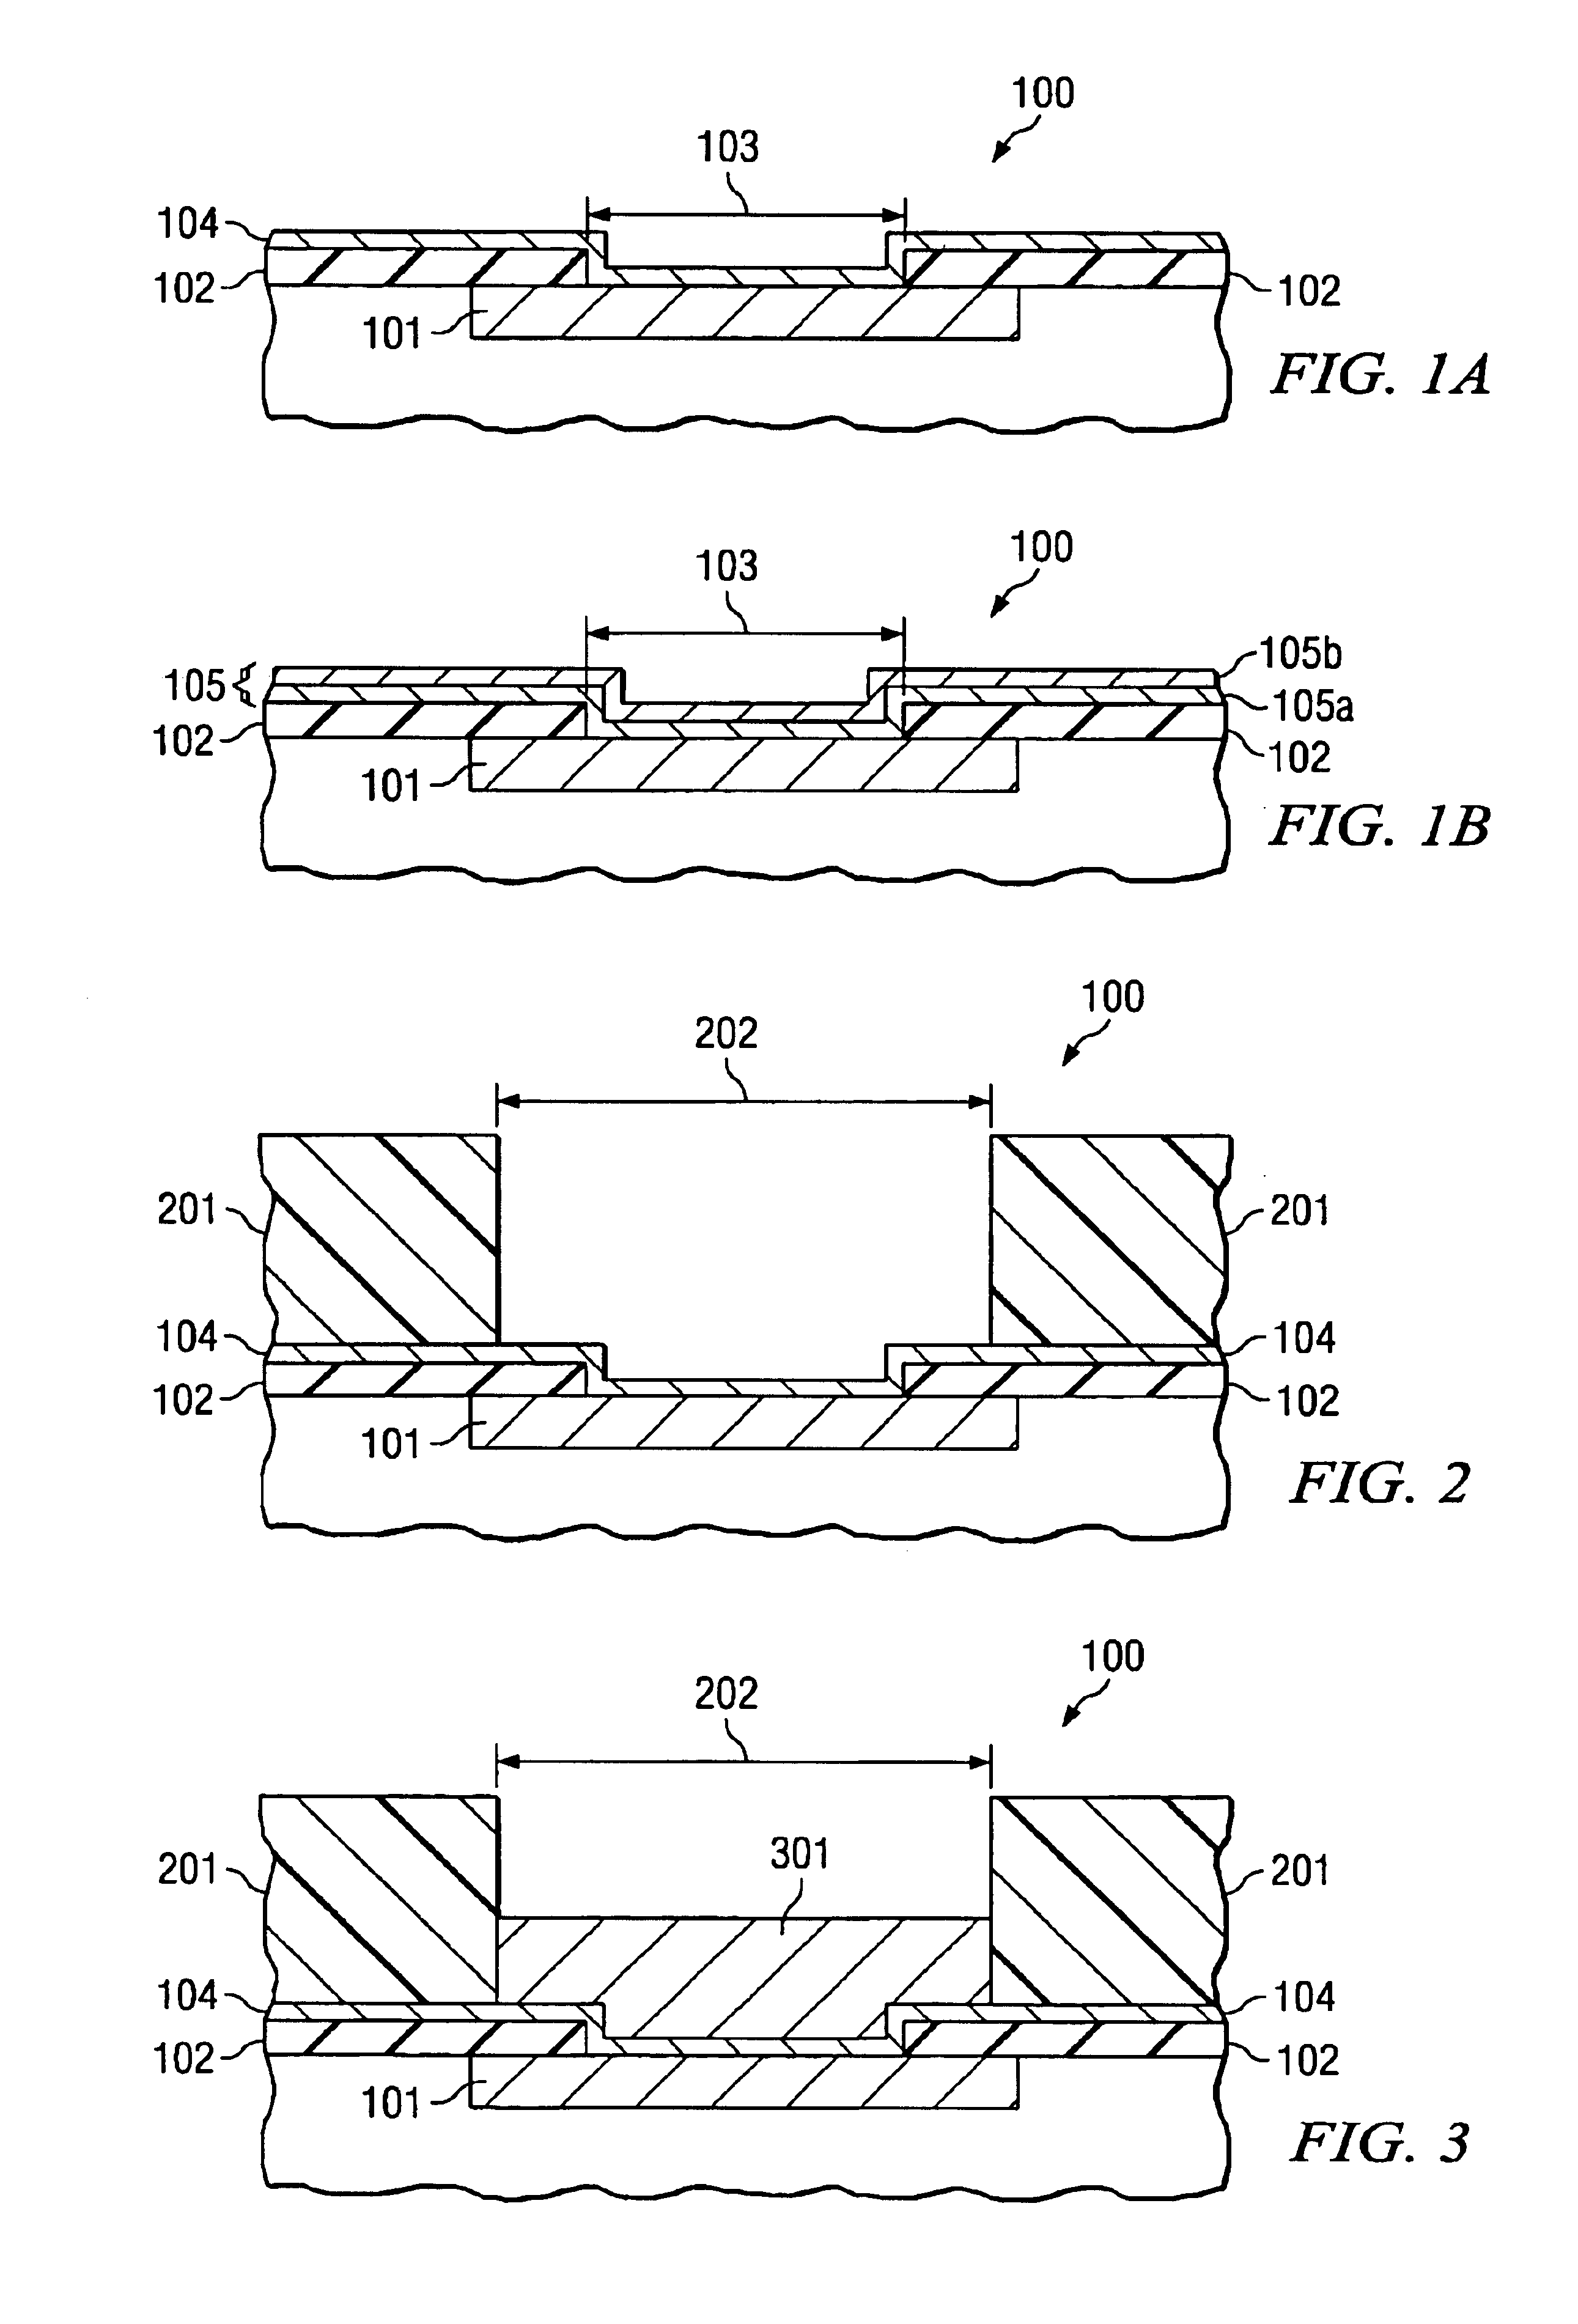 Sealing and protecting integrated circuit bonding pads